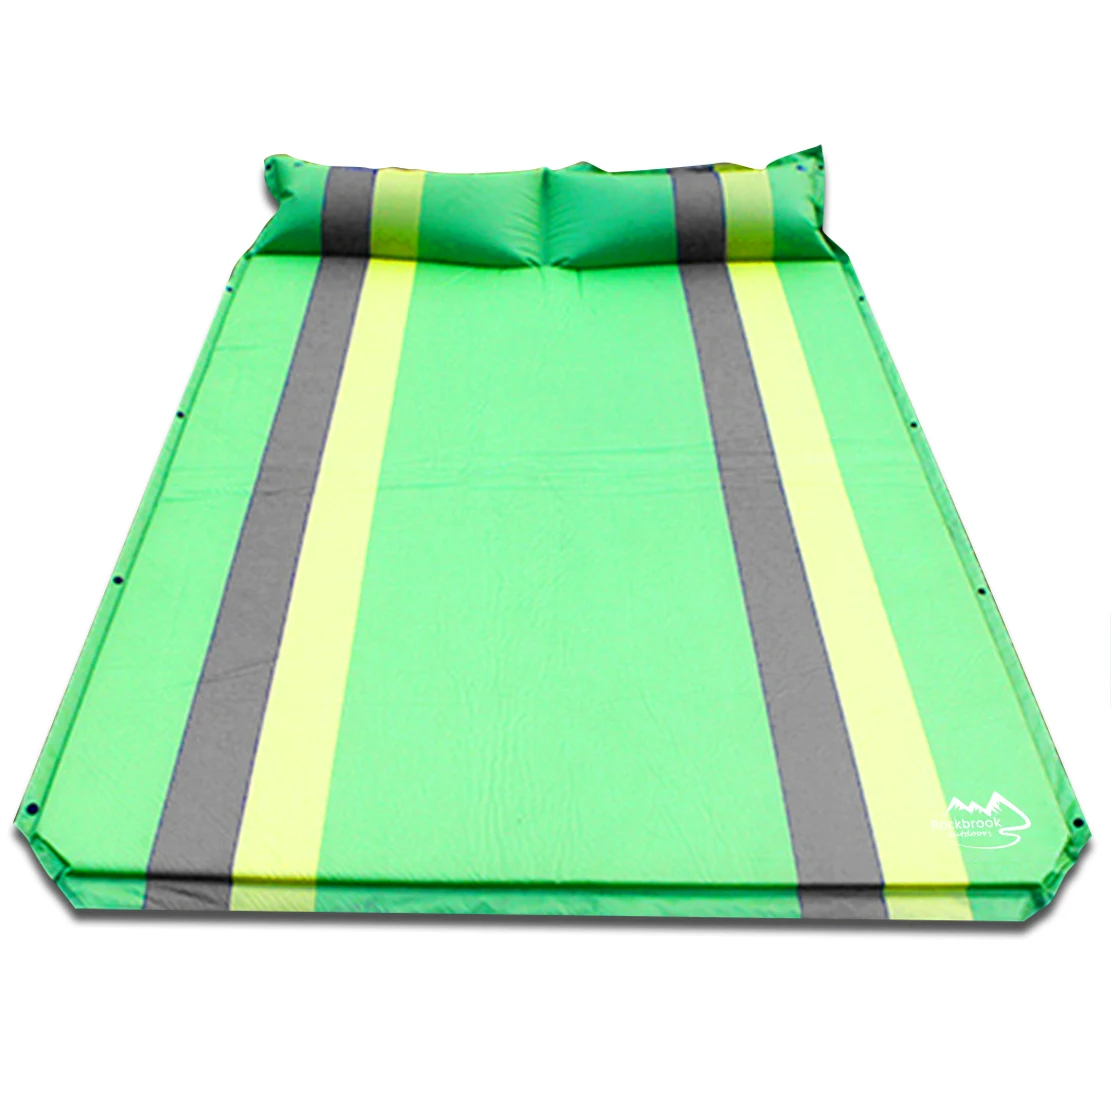 

Oversized Doulble Self Inflatable Mattress Camping Mat Insulated Winter New Spliced Filling Sleeping Pad with Pillow, Blue/green